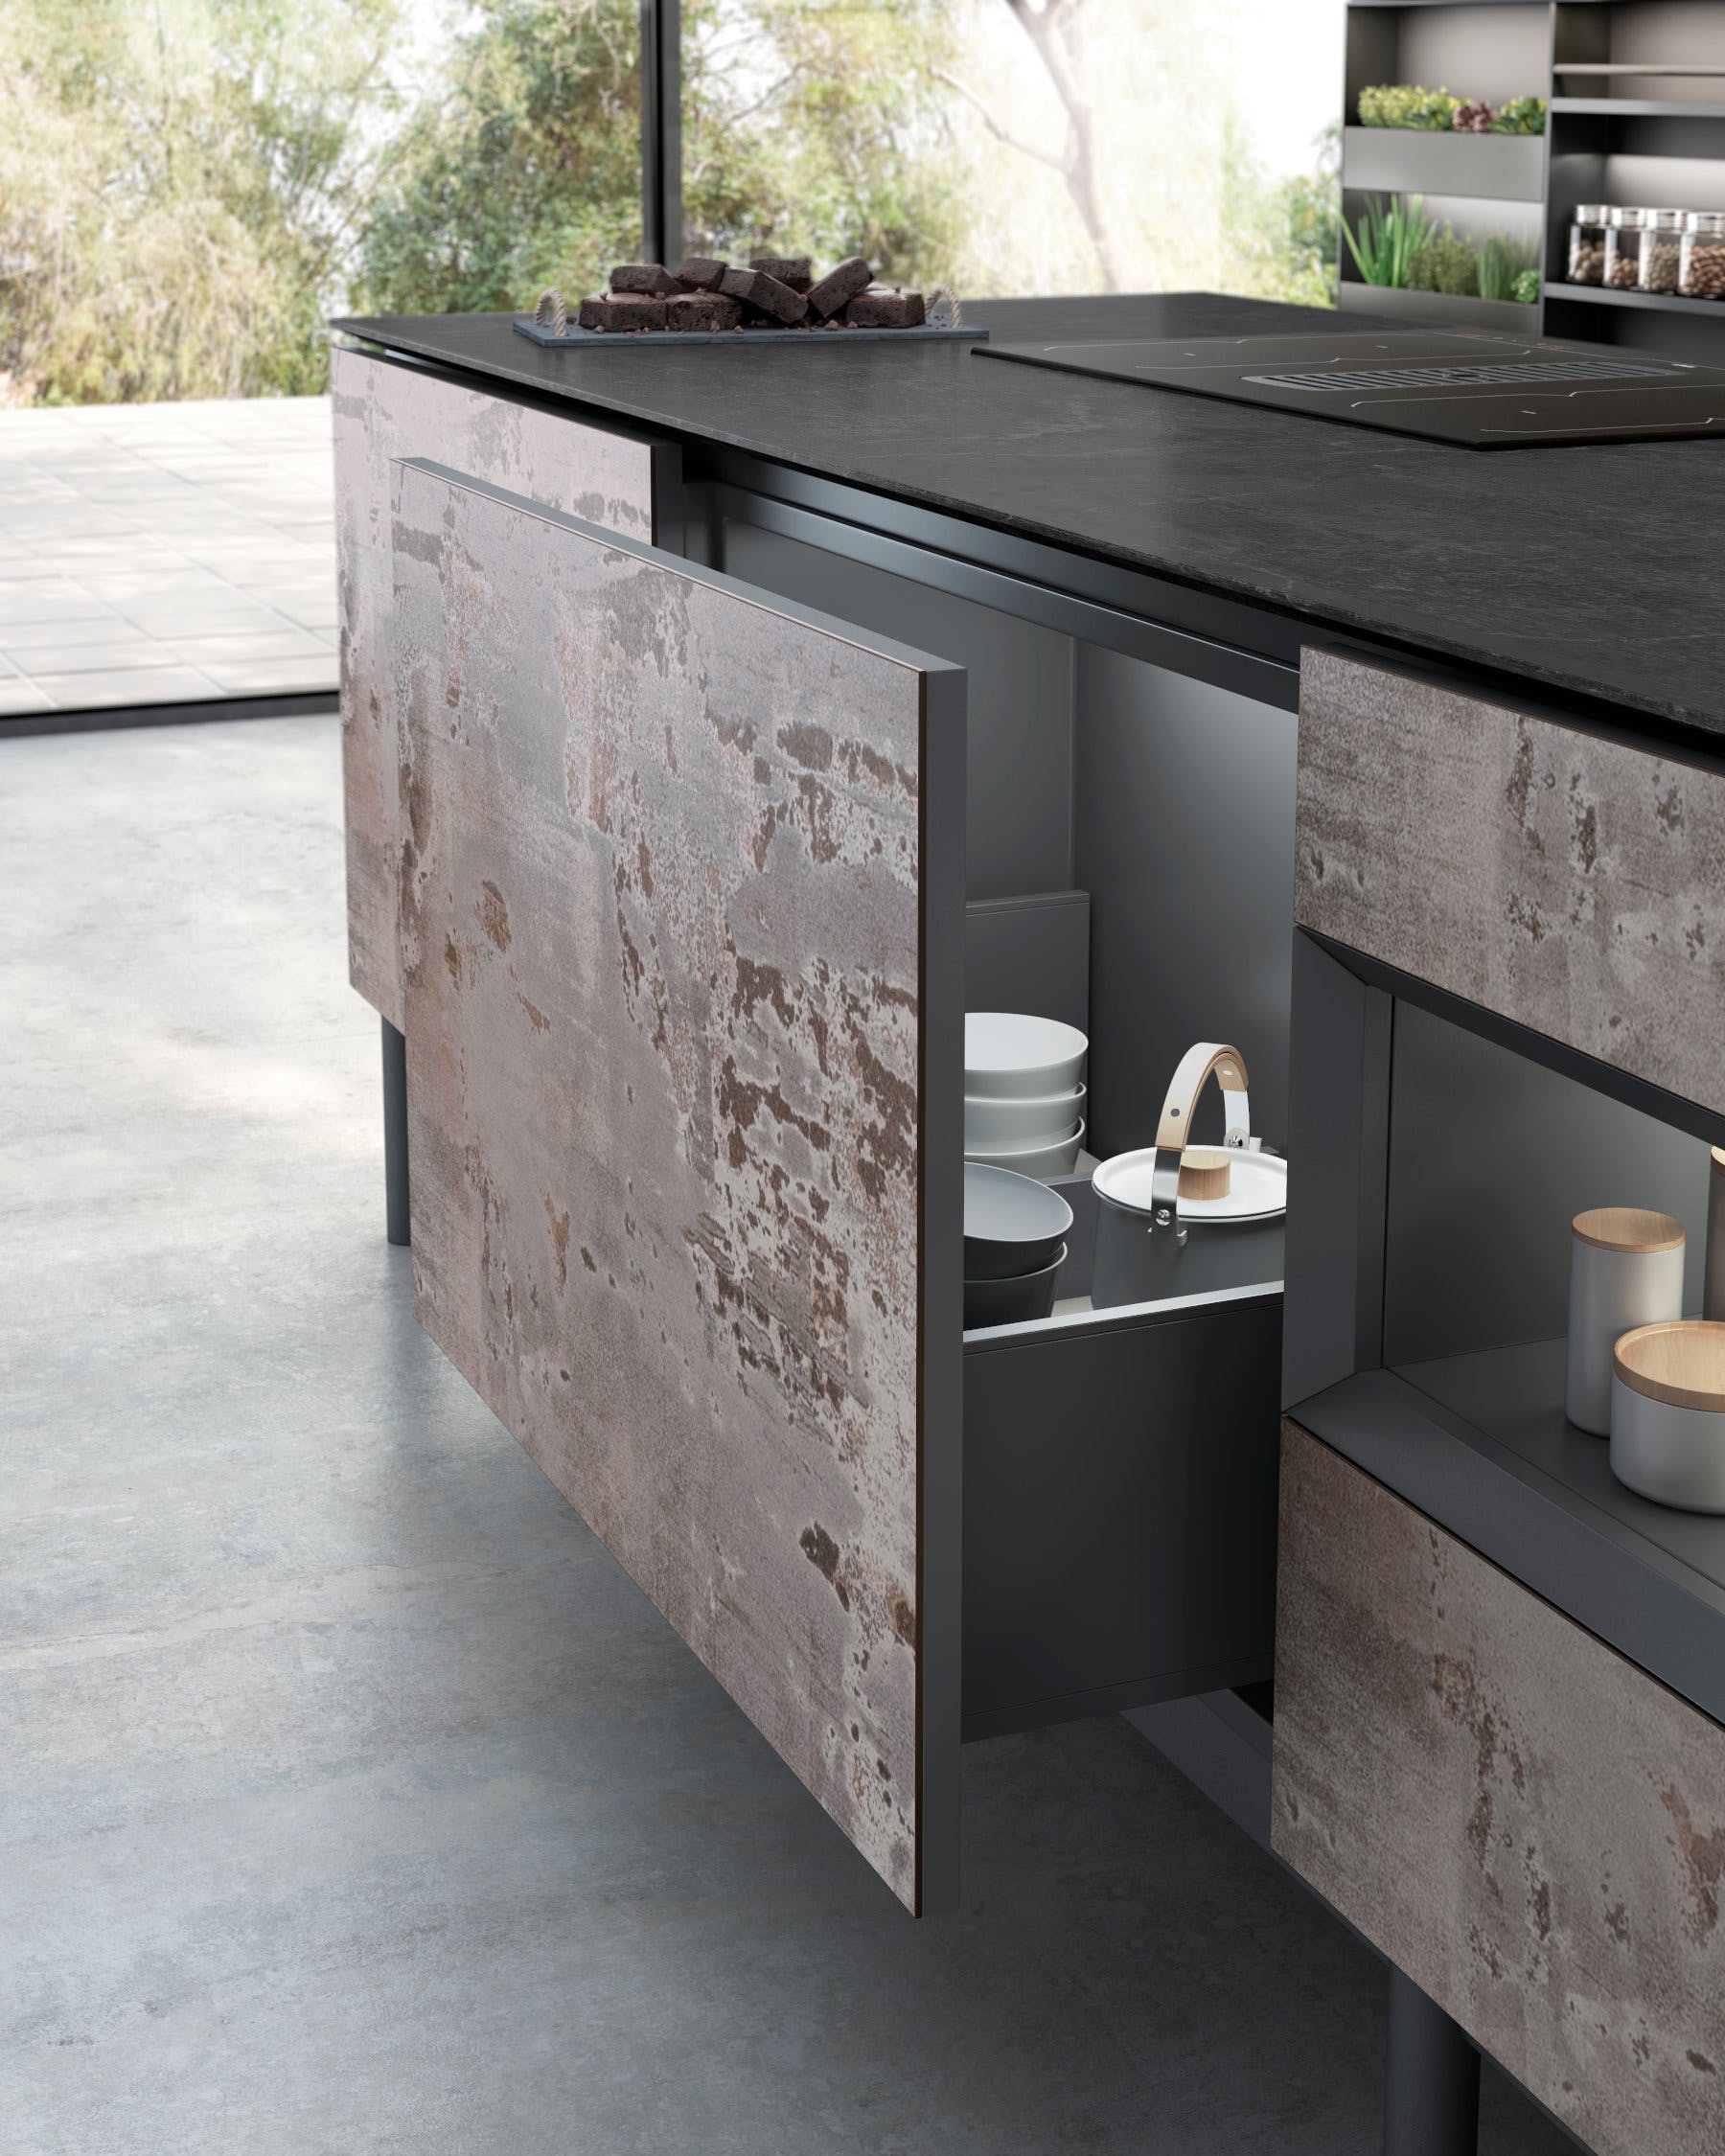 Image 35 of Dekton Kitchen Trilium Detalle 1 1 in How to organise your kitchen and keep it that way - Cosentino